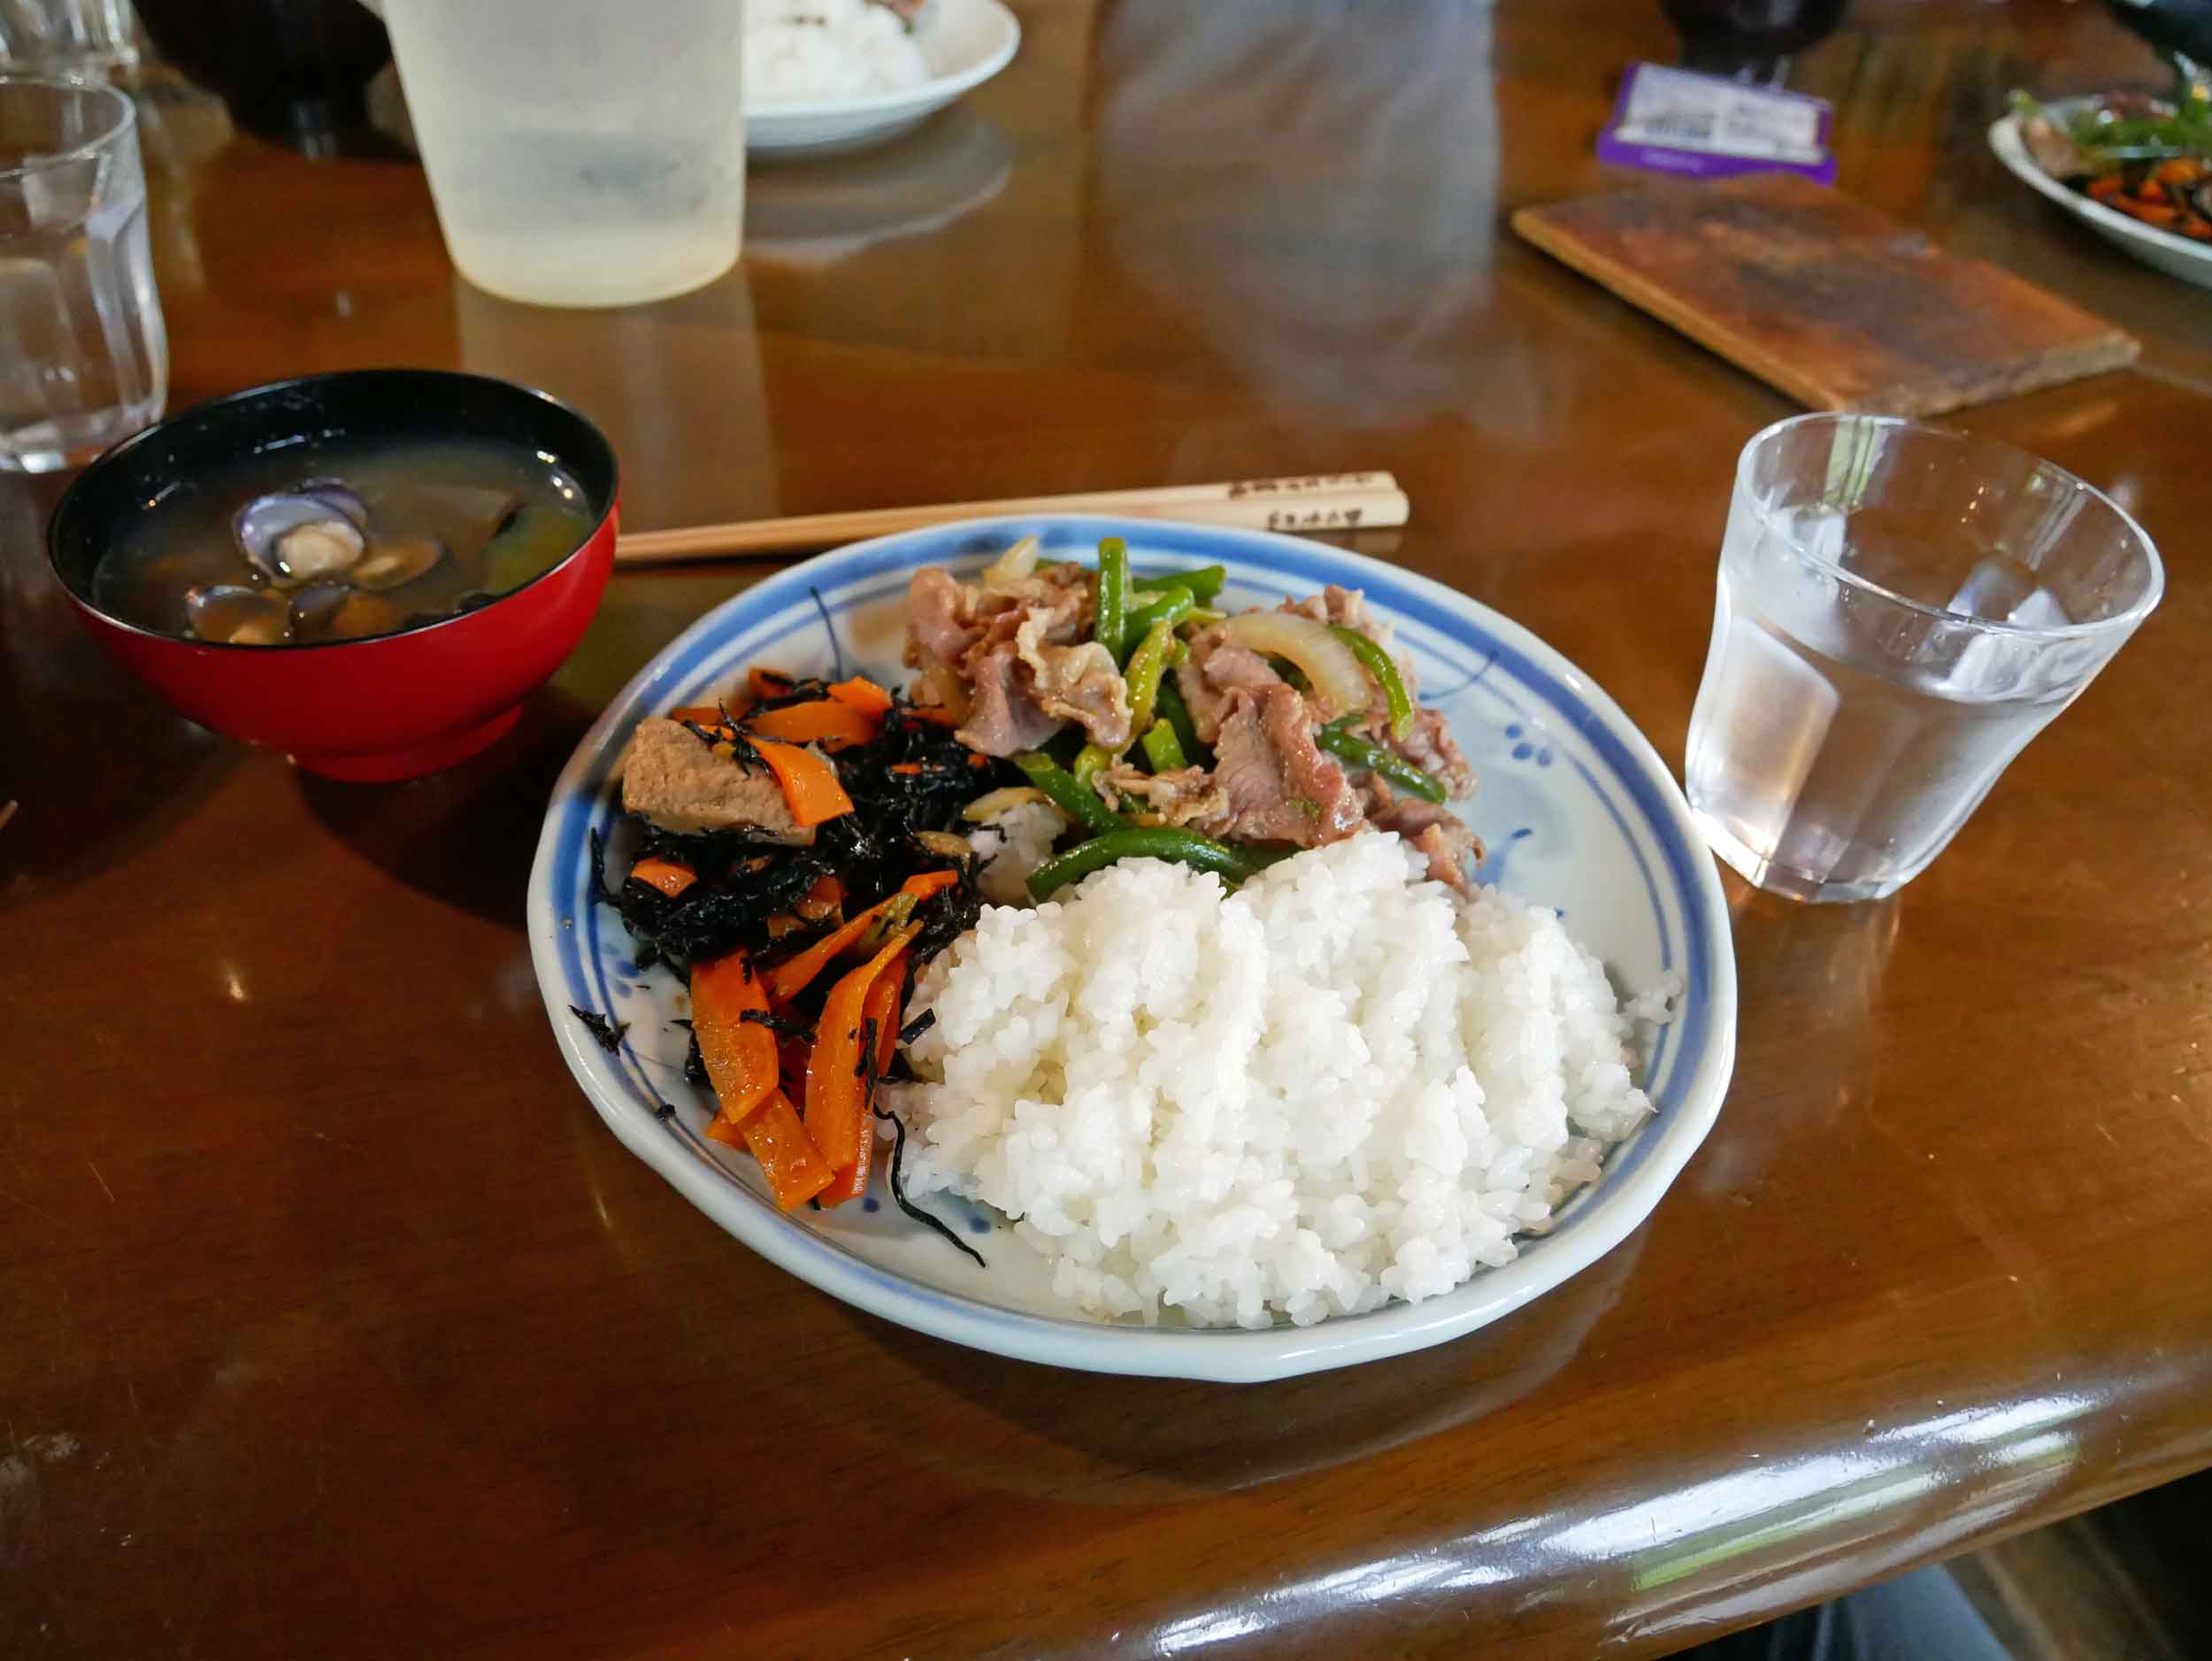  We were rewarded for our labour with delicious Japanese meals prepared by our lovely host, Junko-San. 